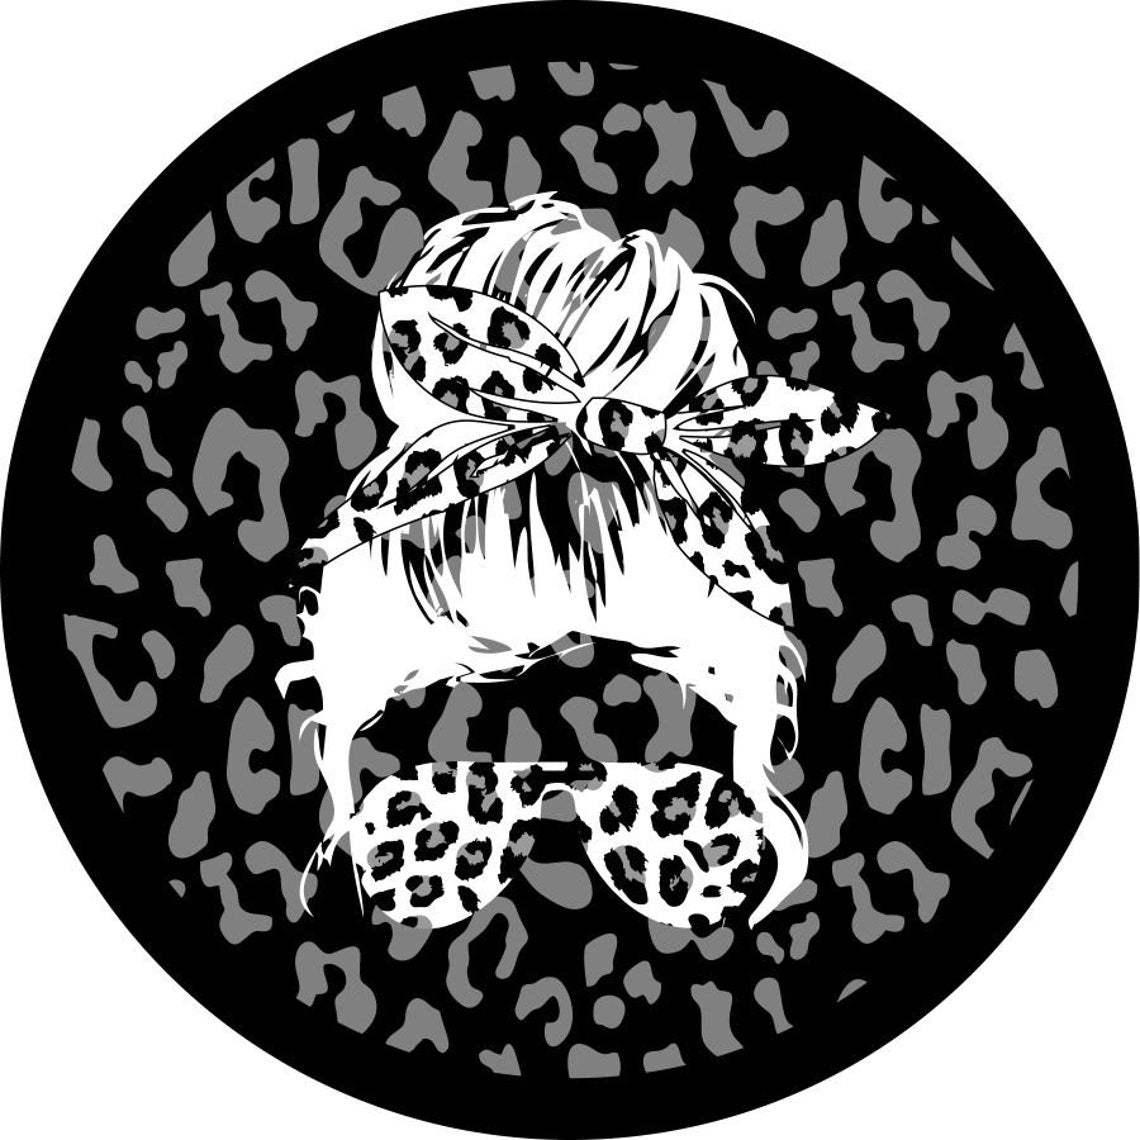 Leopard Print Spare Tire Cover With Top Knot Girl Silhouette Design